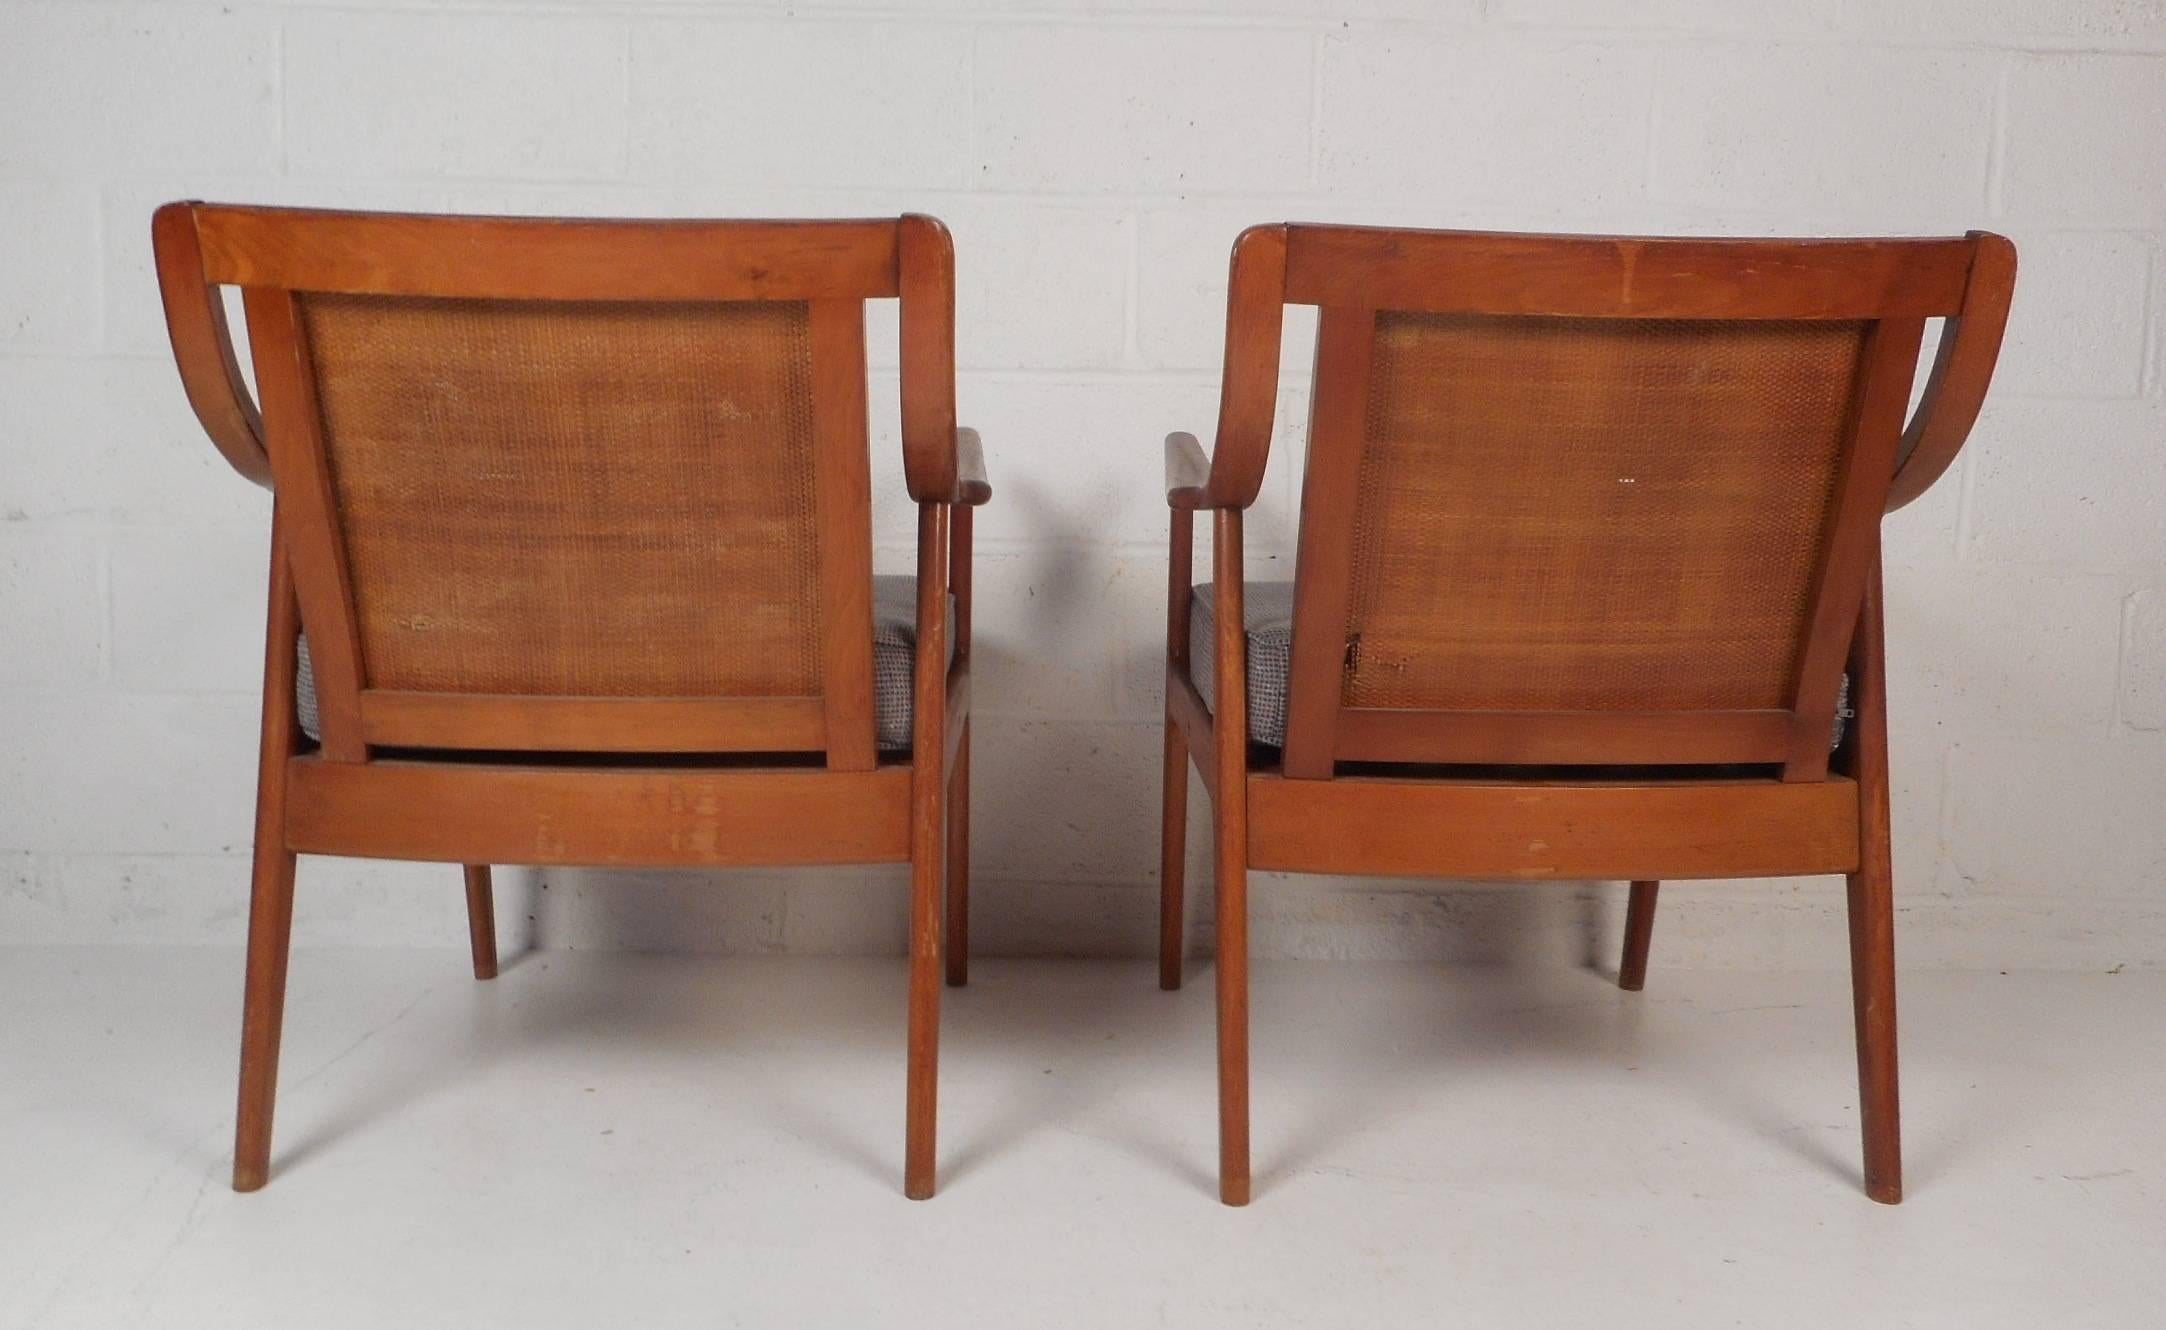 Upholstery Mid-Century Modern Armchairs with Cane Back Rests